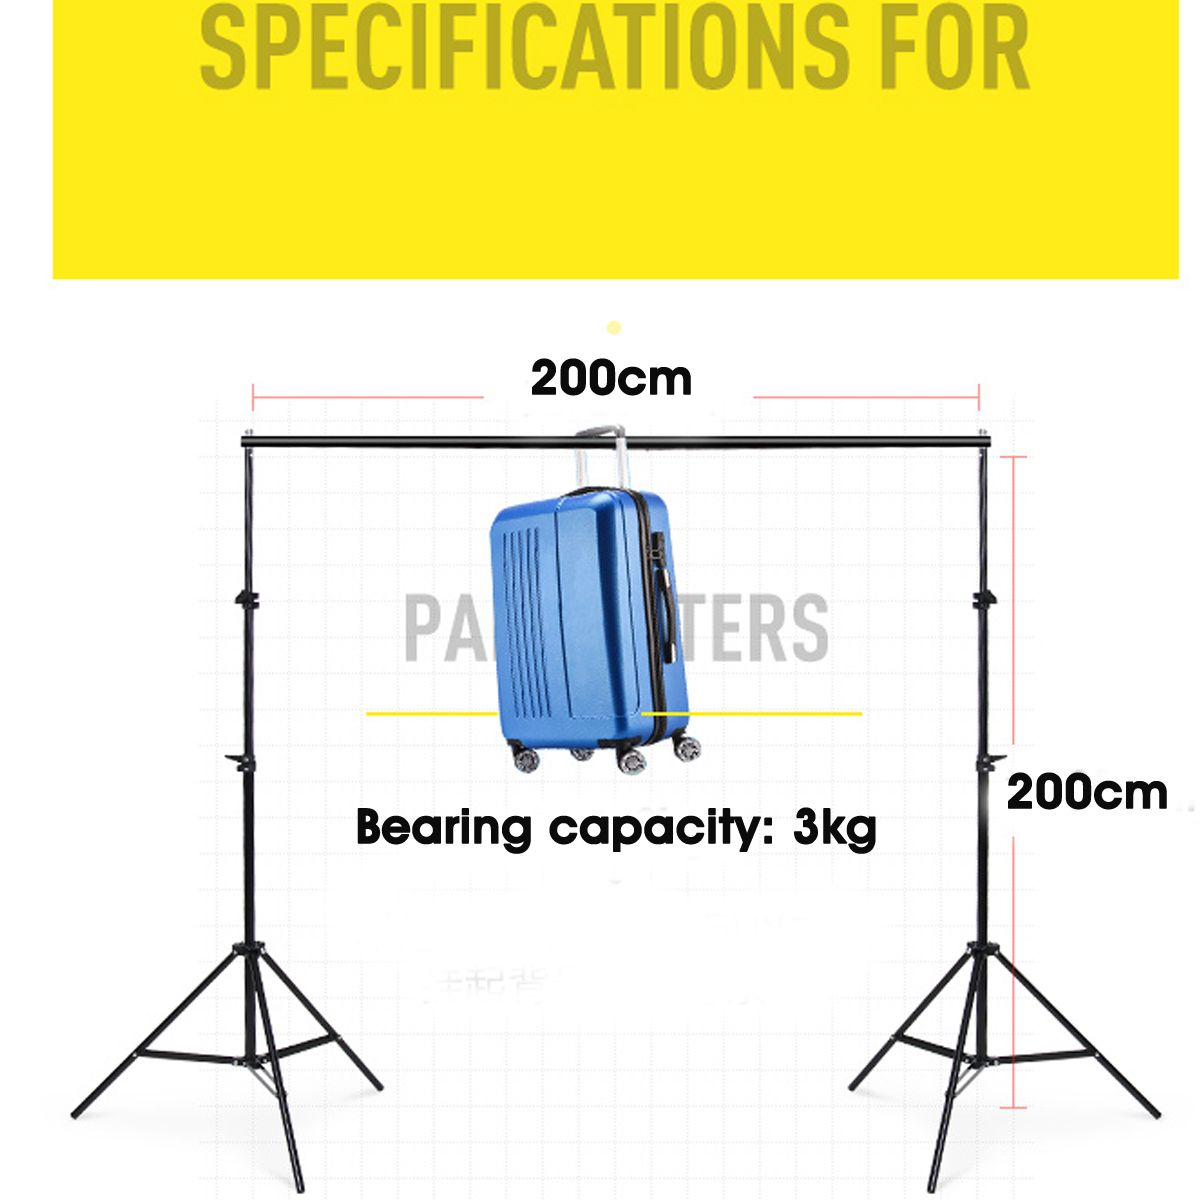 Aluminum-Alloy-Photography-Background-Stand-Tools-Kit-Portable-Easy-Installl-1549556